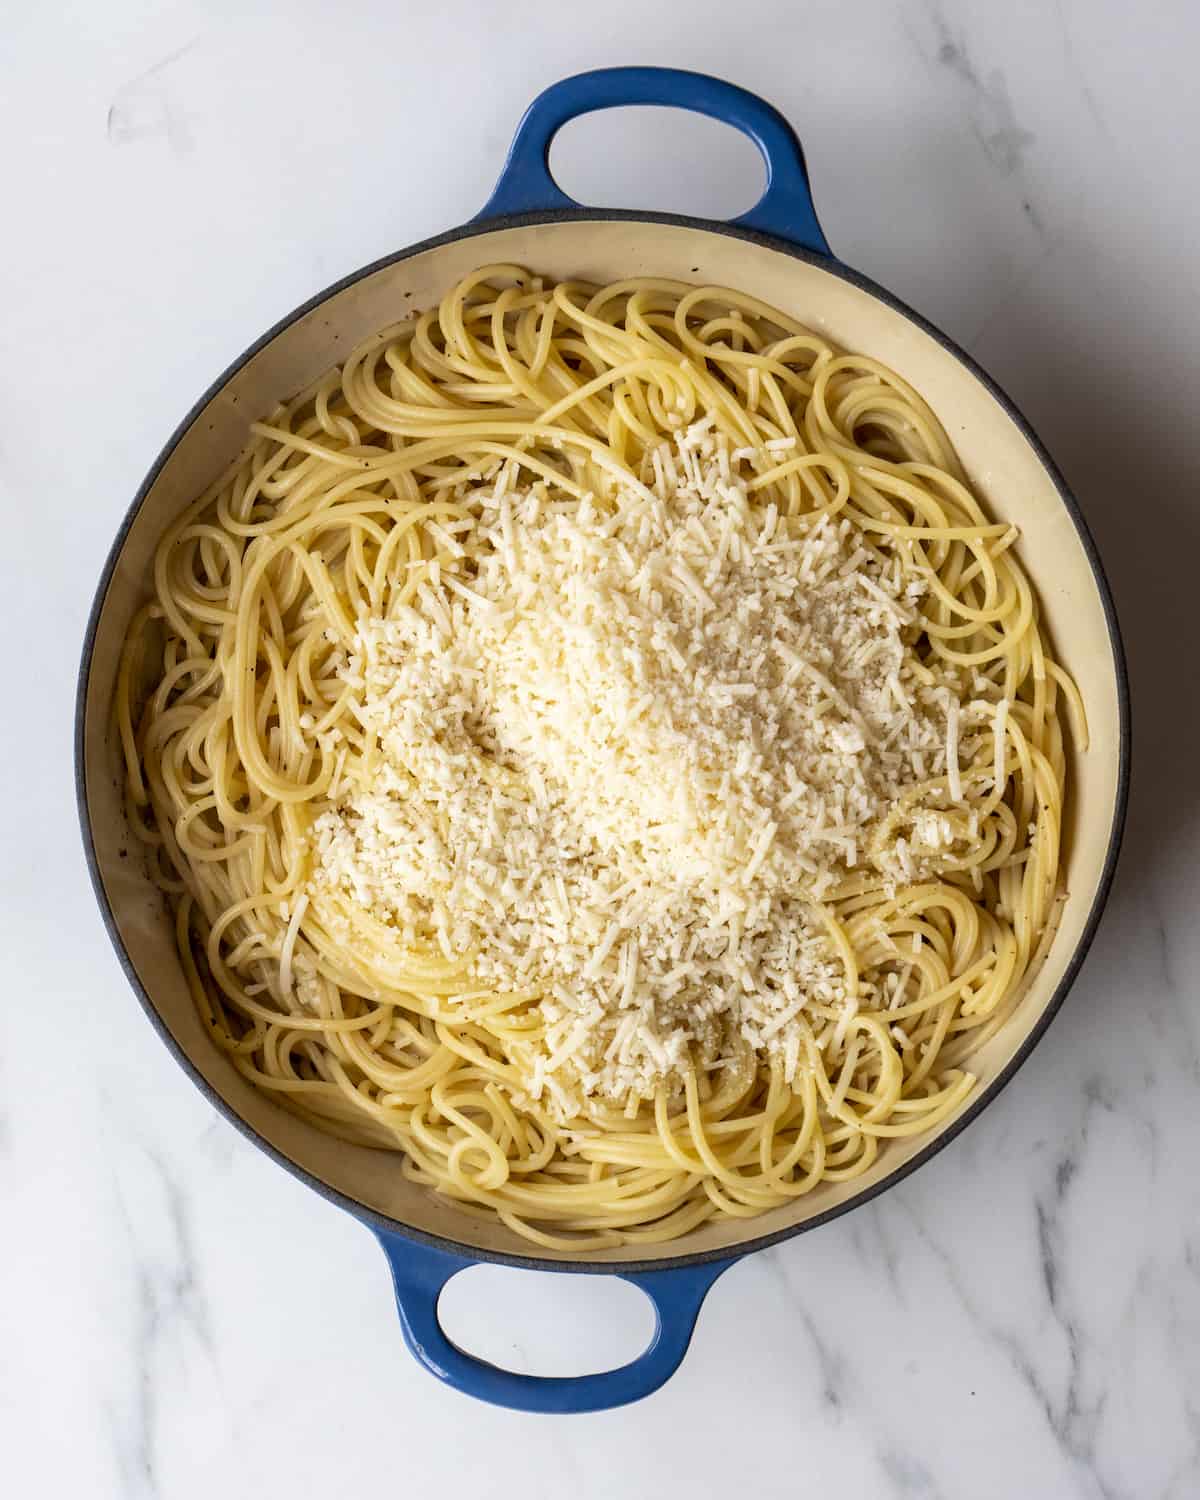 A large skillet with cooked spaghetti and shaved parmesan.  